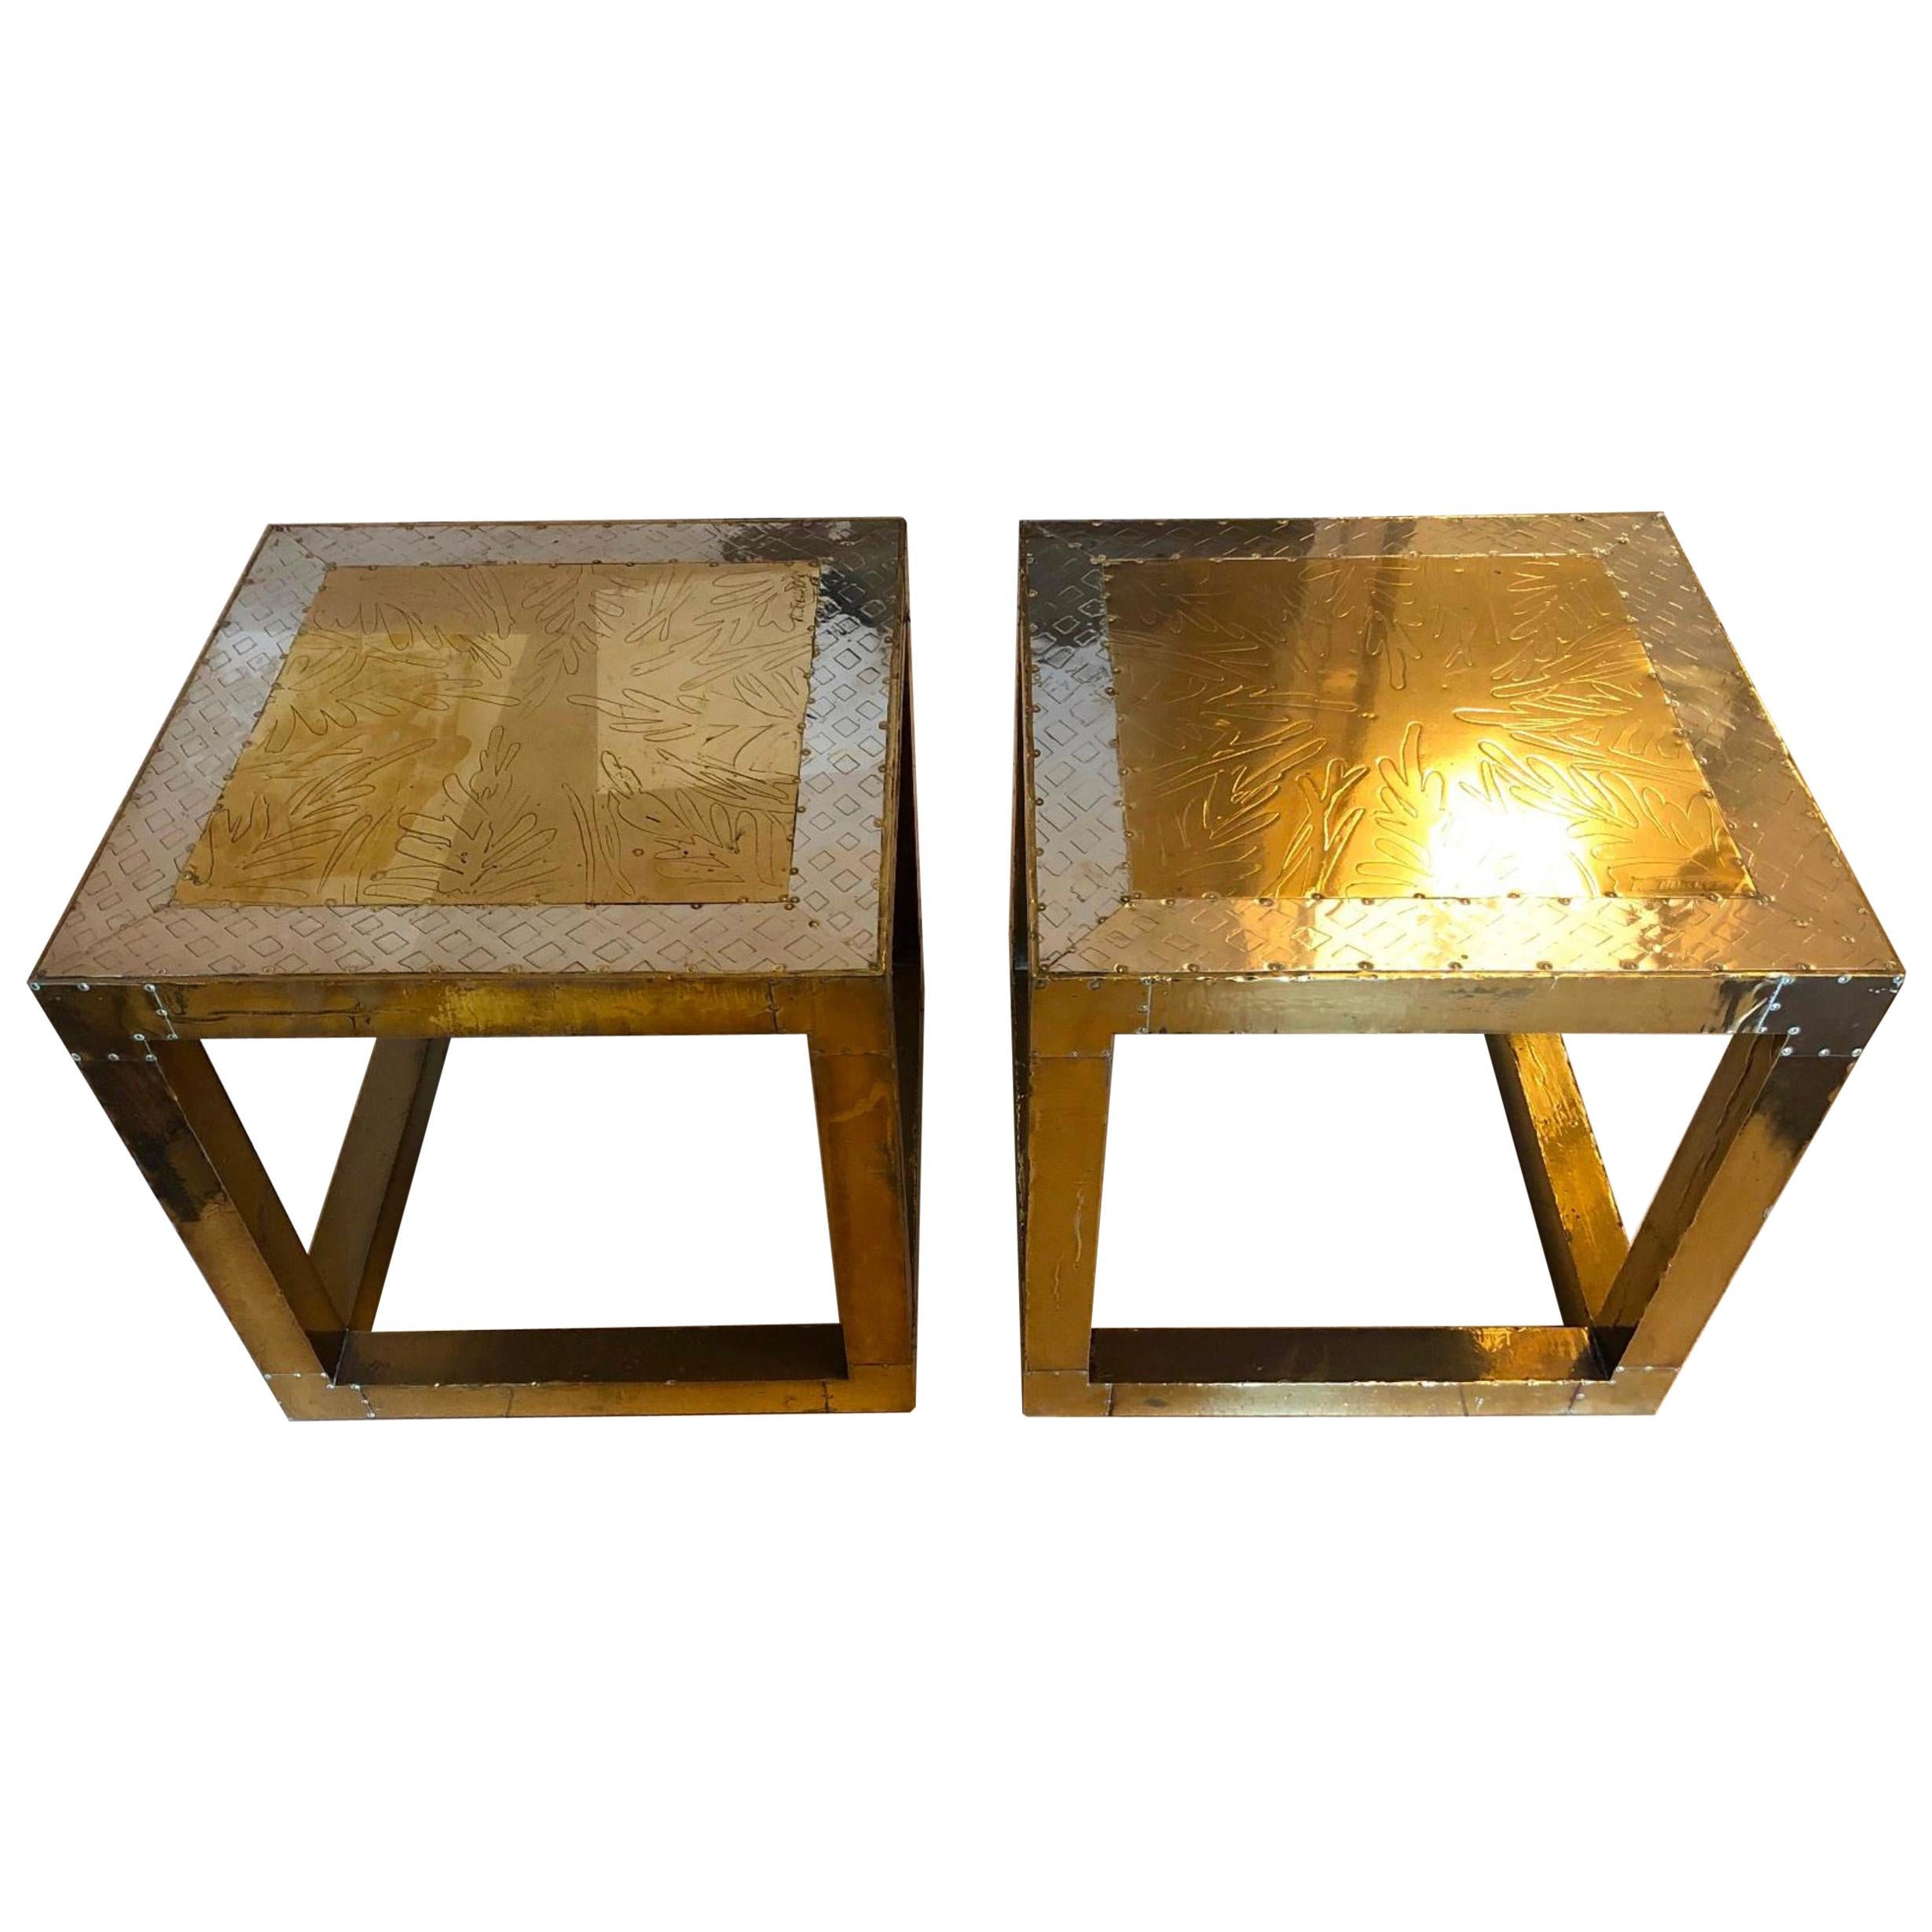 20th Century Vintage Spanish Set of Three Golden Metal Sofa Tables Signed by Rudolfo Dubarry For Sale